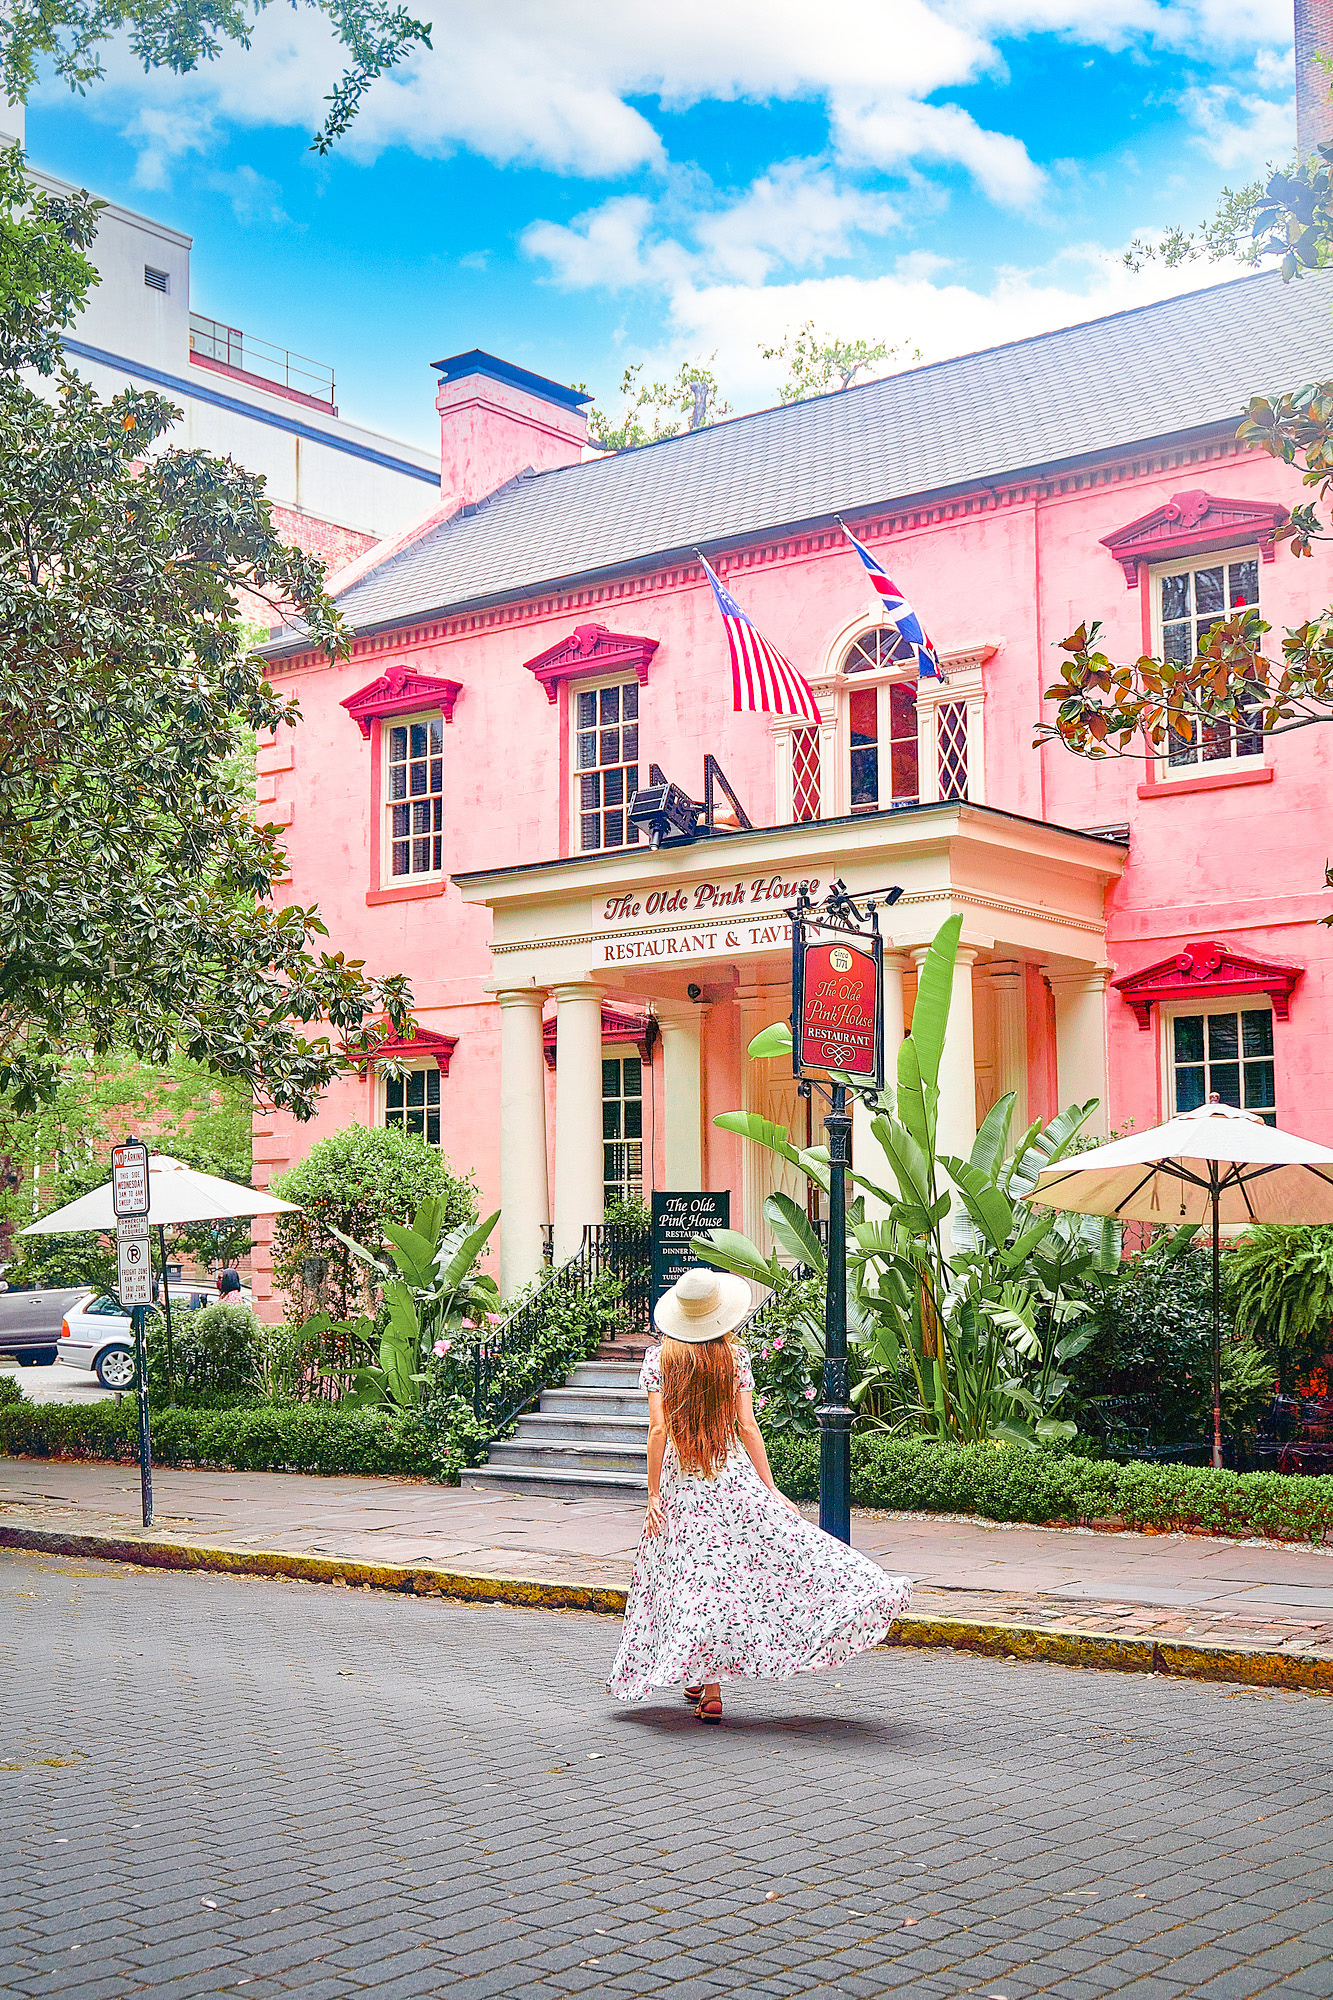 A woman standing on a cobblestone street in a long floral dress with her long hair down and a white sun hat. She is standing in front of The Olde Pink House, a historic building that is now a restaurant and tavern. It is a large building that is kind of the color of pepto bismol. The windows have a darker pink trim. There are umbrellas and lots of greenery in front of the building. A unique building to see during your 3 days in Savannah